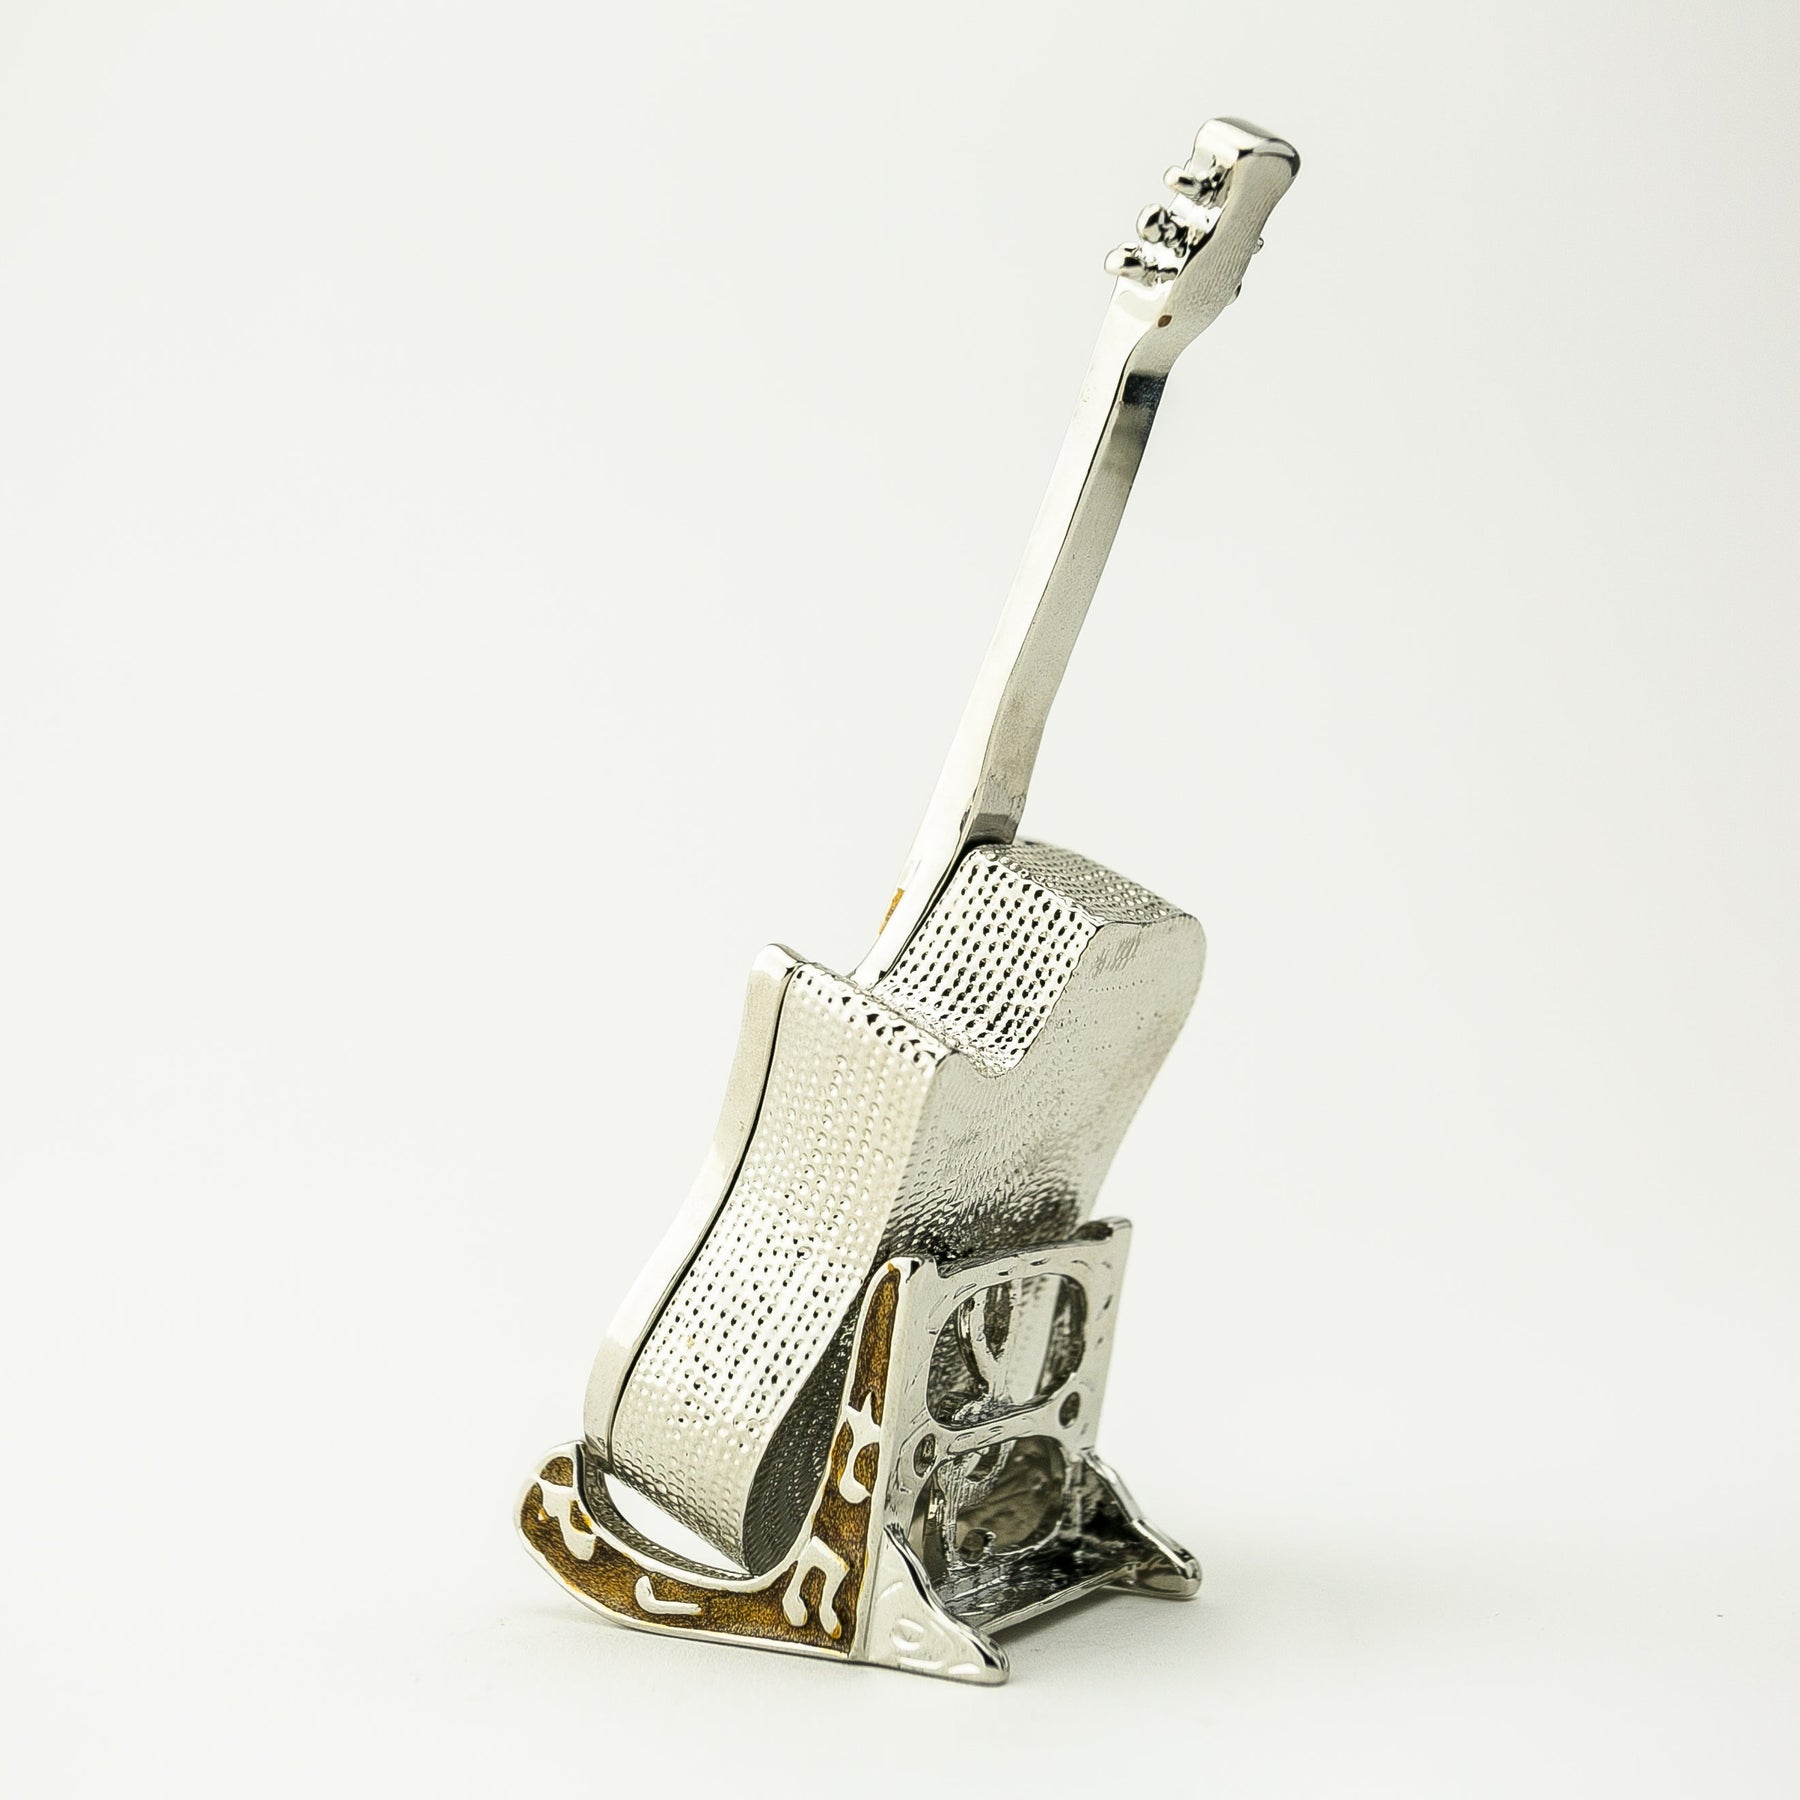 Guitar on Stand